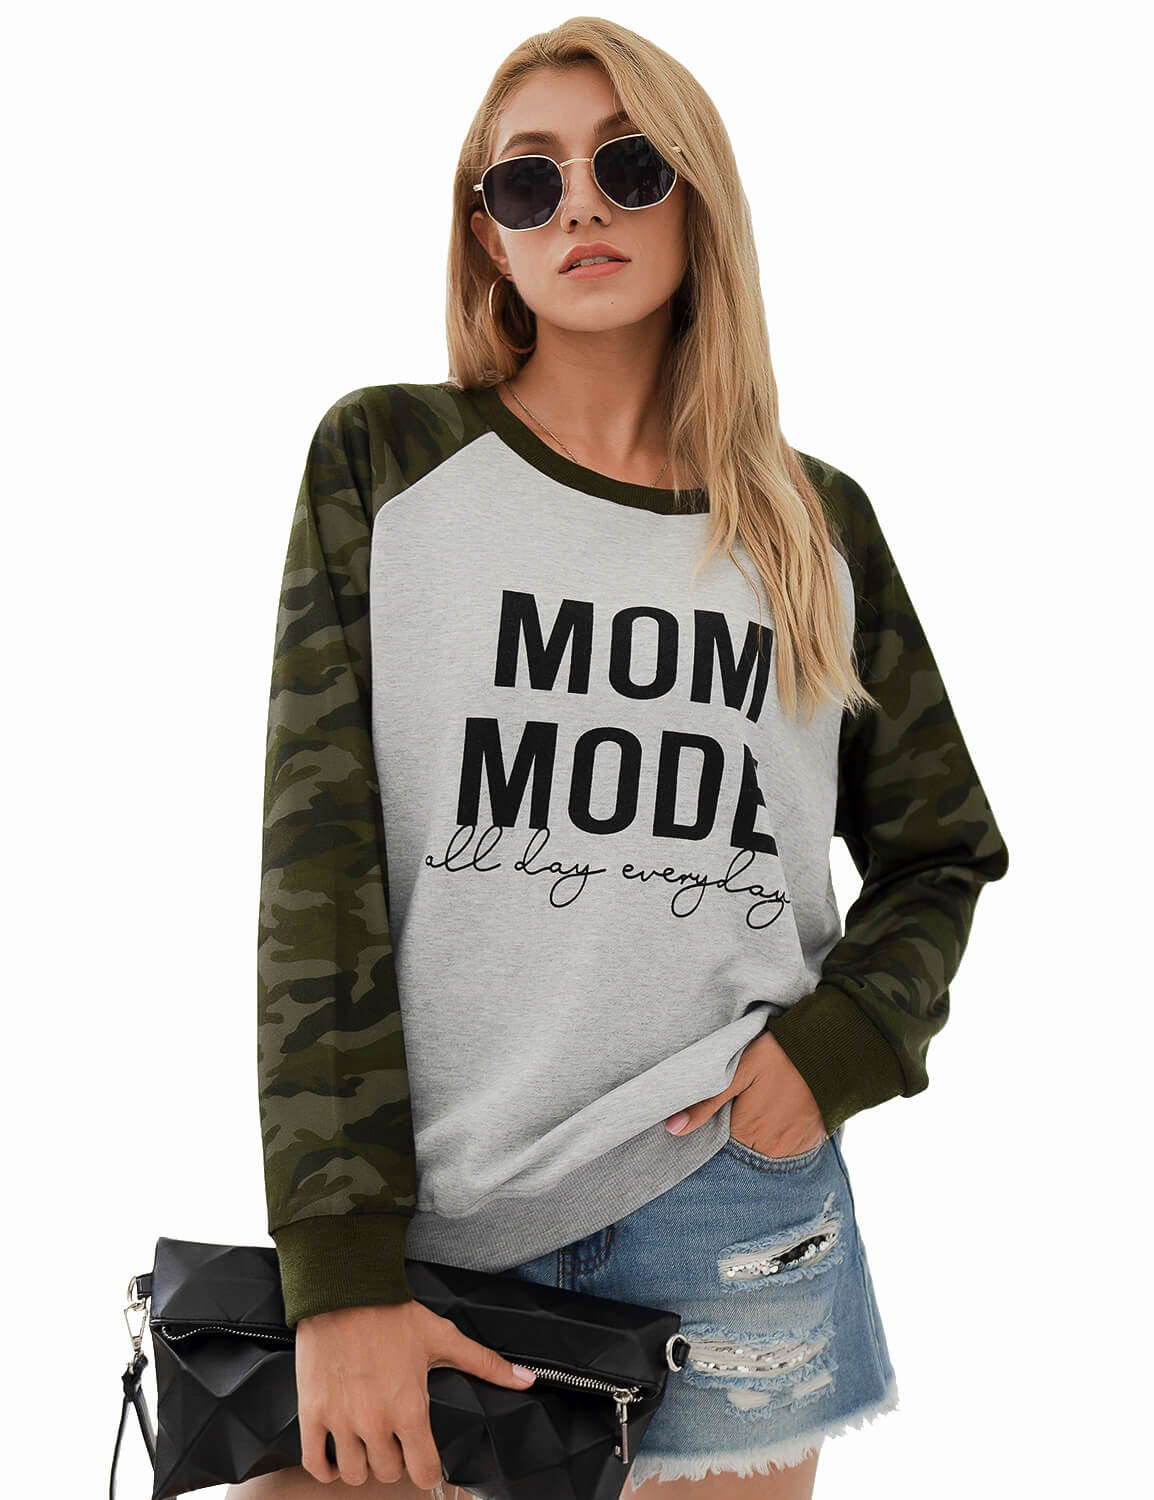 Blooming Jelly_Mom Mode Camo Patchwork Sweatshirt_Letter Print_303087_07_Mom Style Casual Outfits_Tops_Sweatshirt